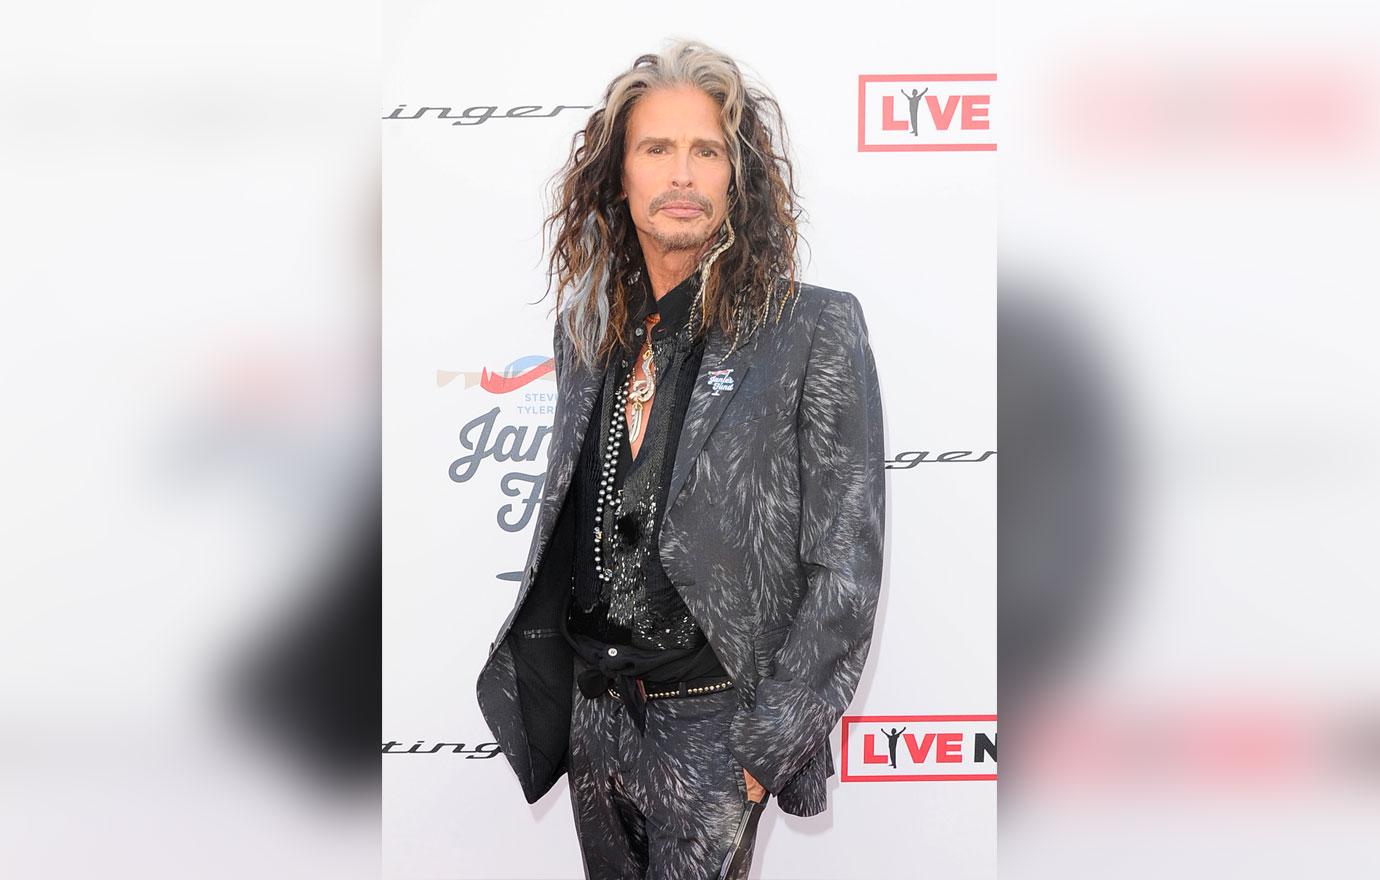 Steven Tyler Smiles With His Gf After Opening Up About Past Drug Spiral